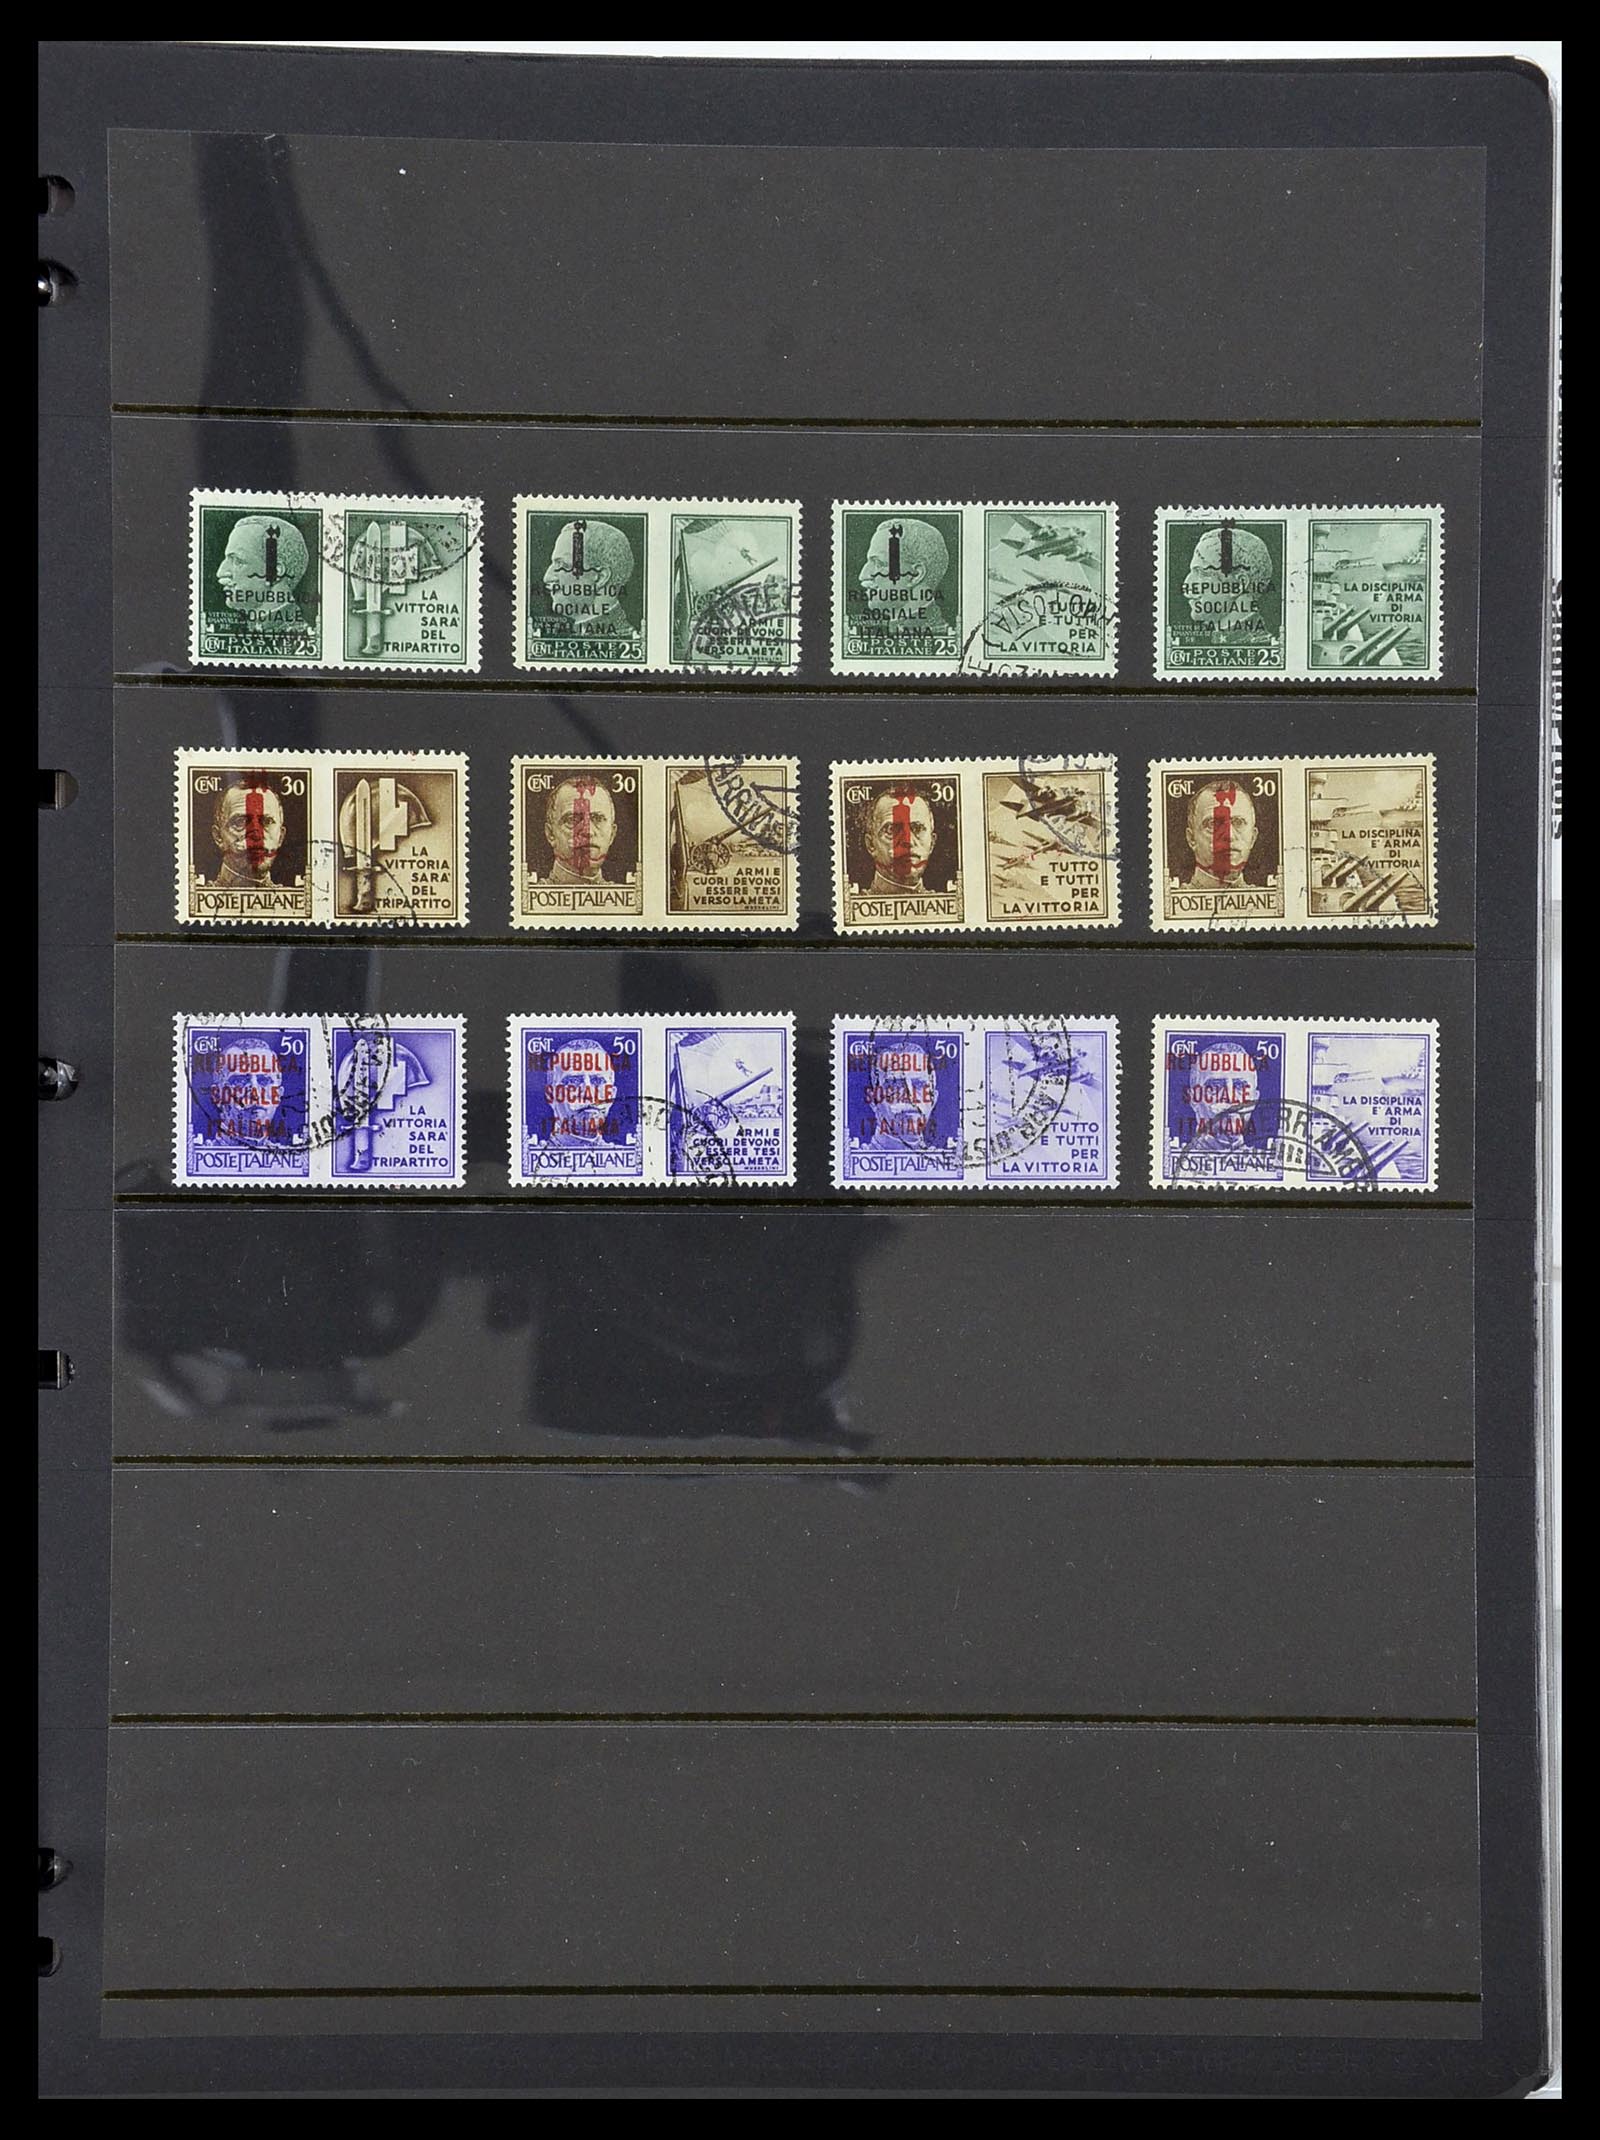 34227 033 - Stamp collection 34227 Italy R.S.I. 1943-1945.